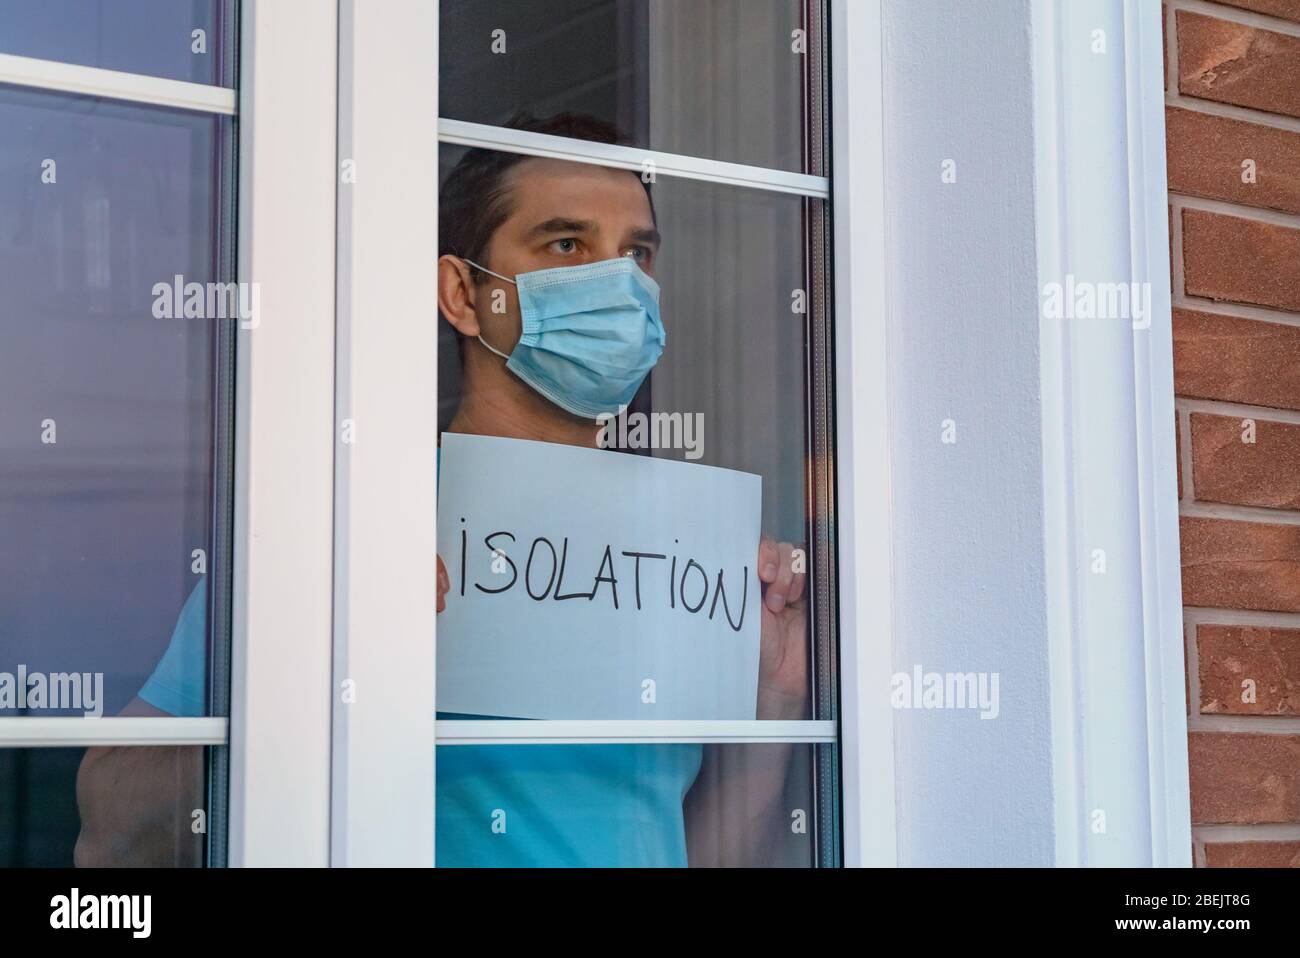 Man in a medical mask holds a tablet - ISOLATION Stock Photo